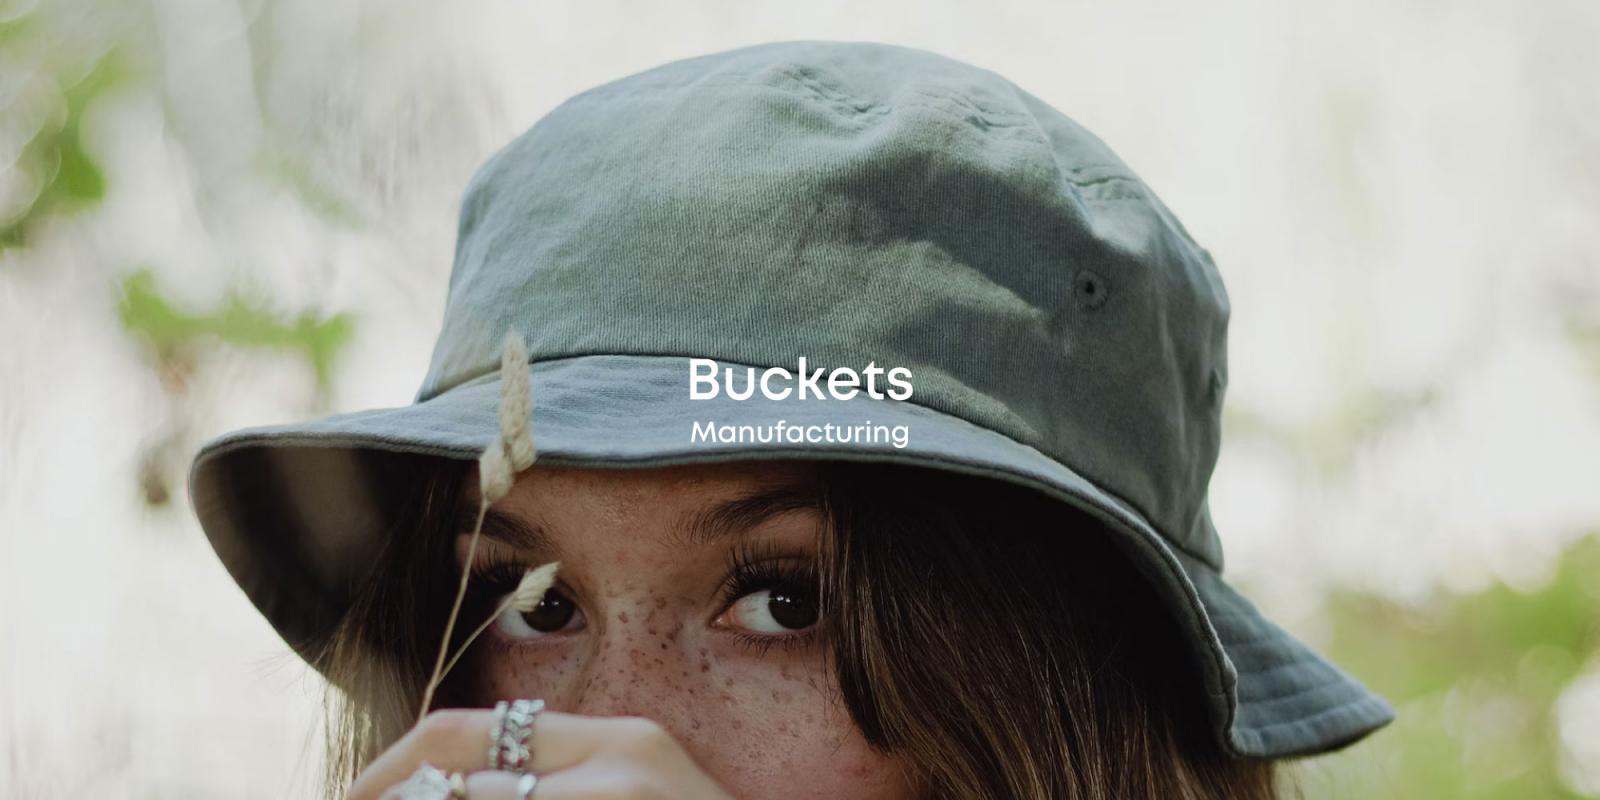 Buckets Manufacturing